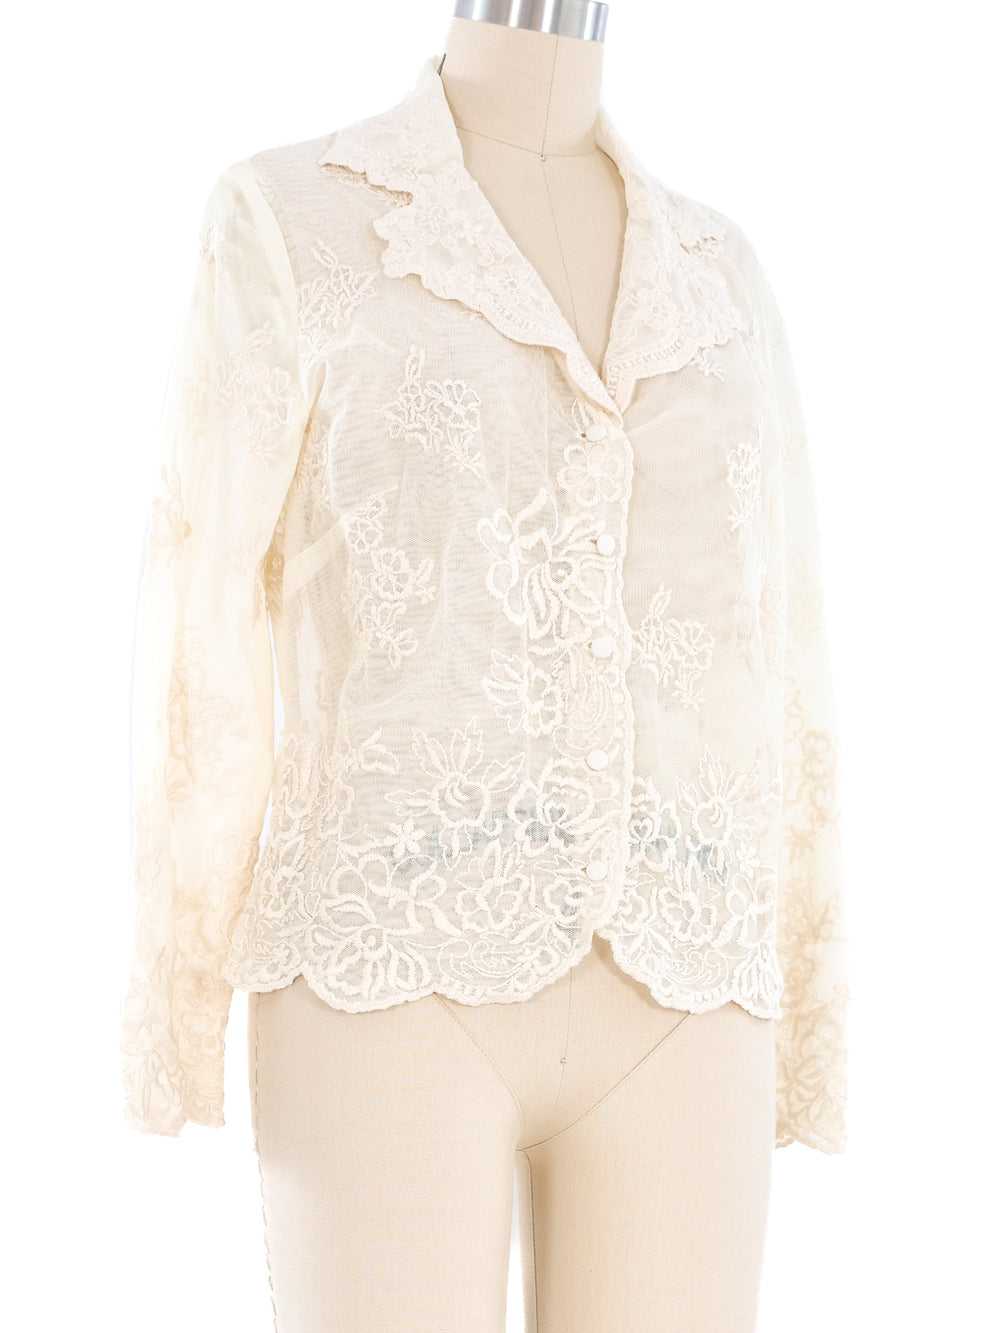 Ivory Floral Lace Blouse - image 3